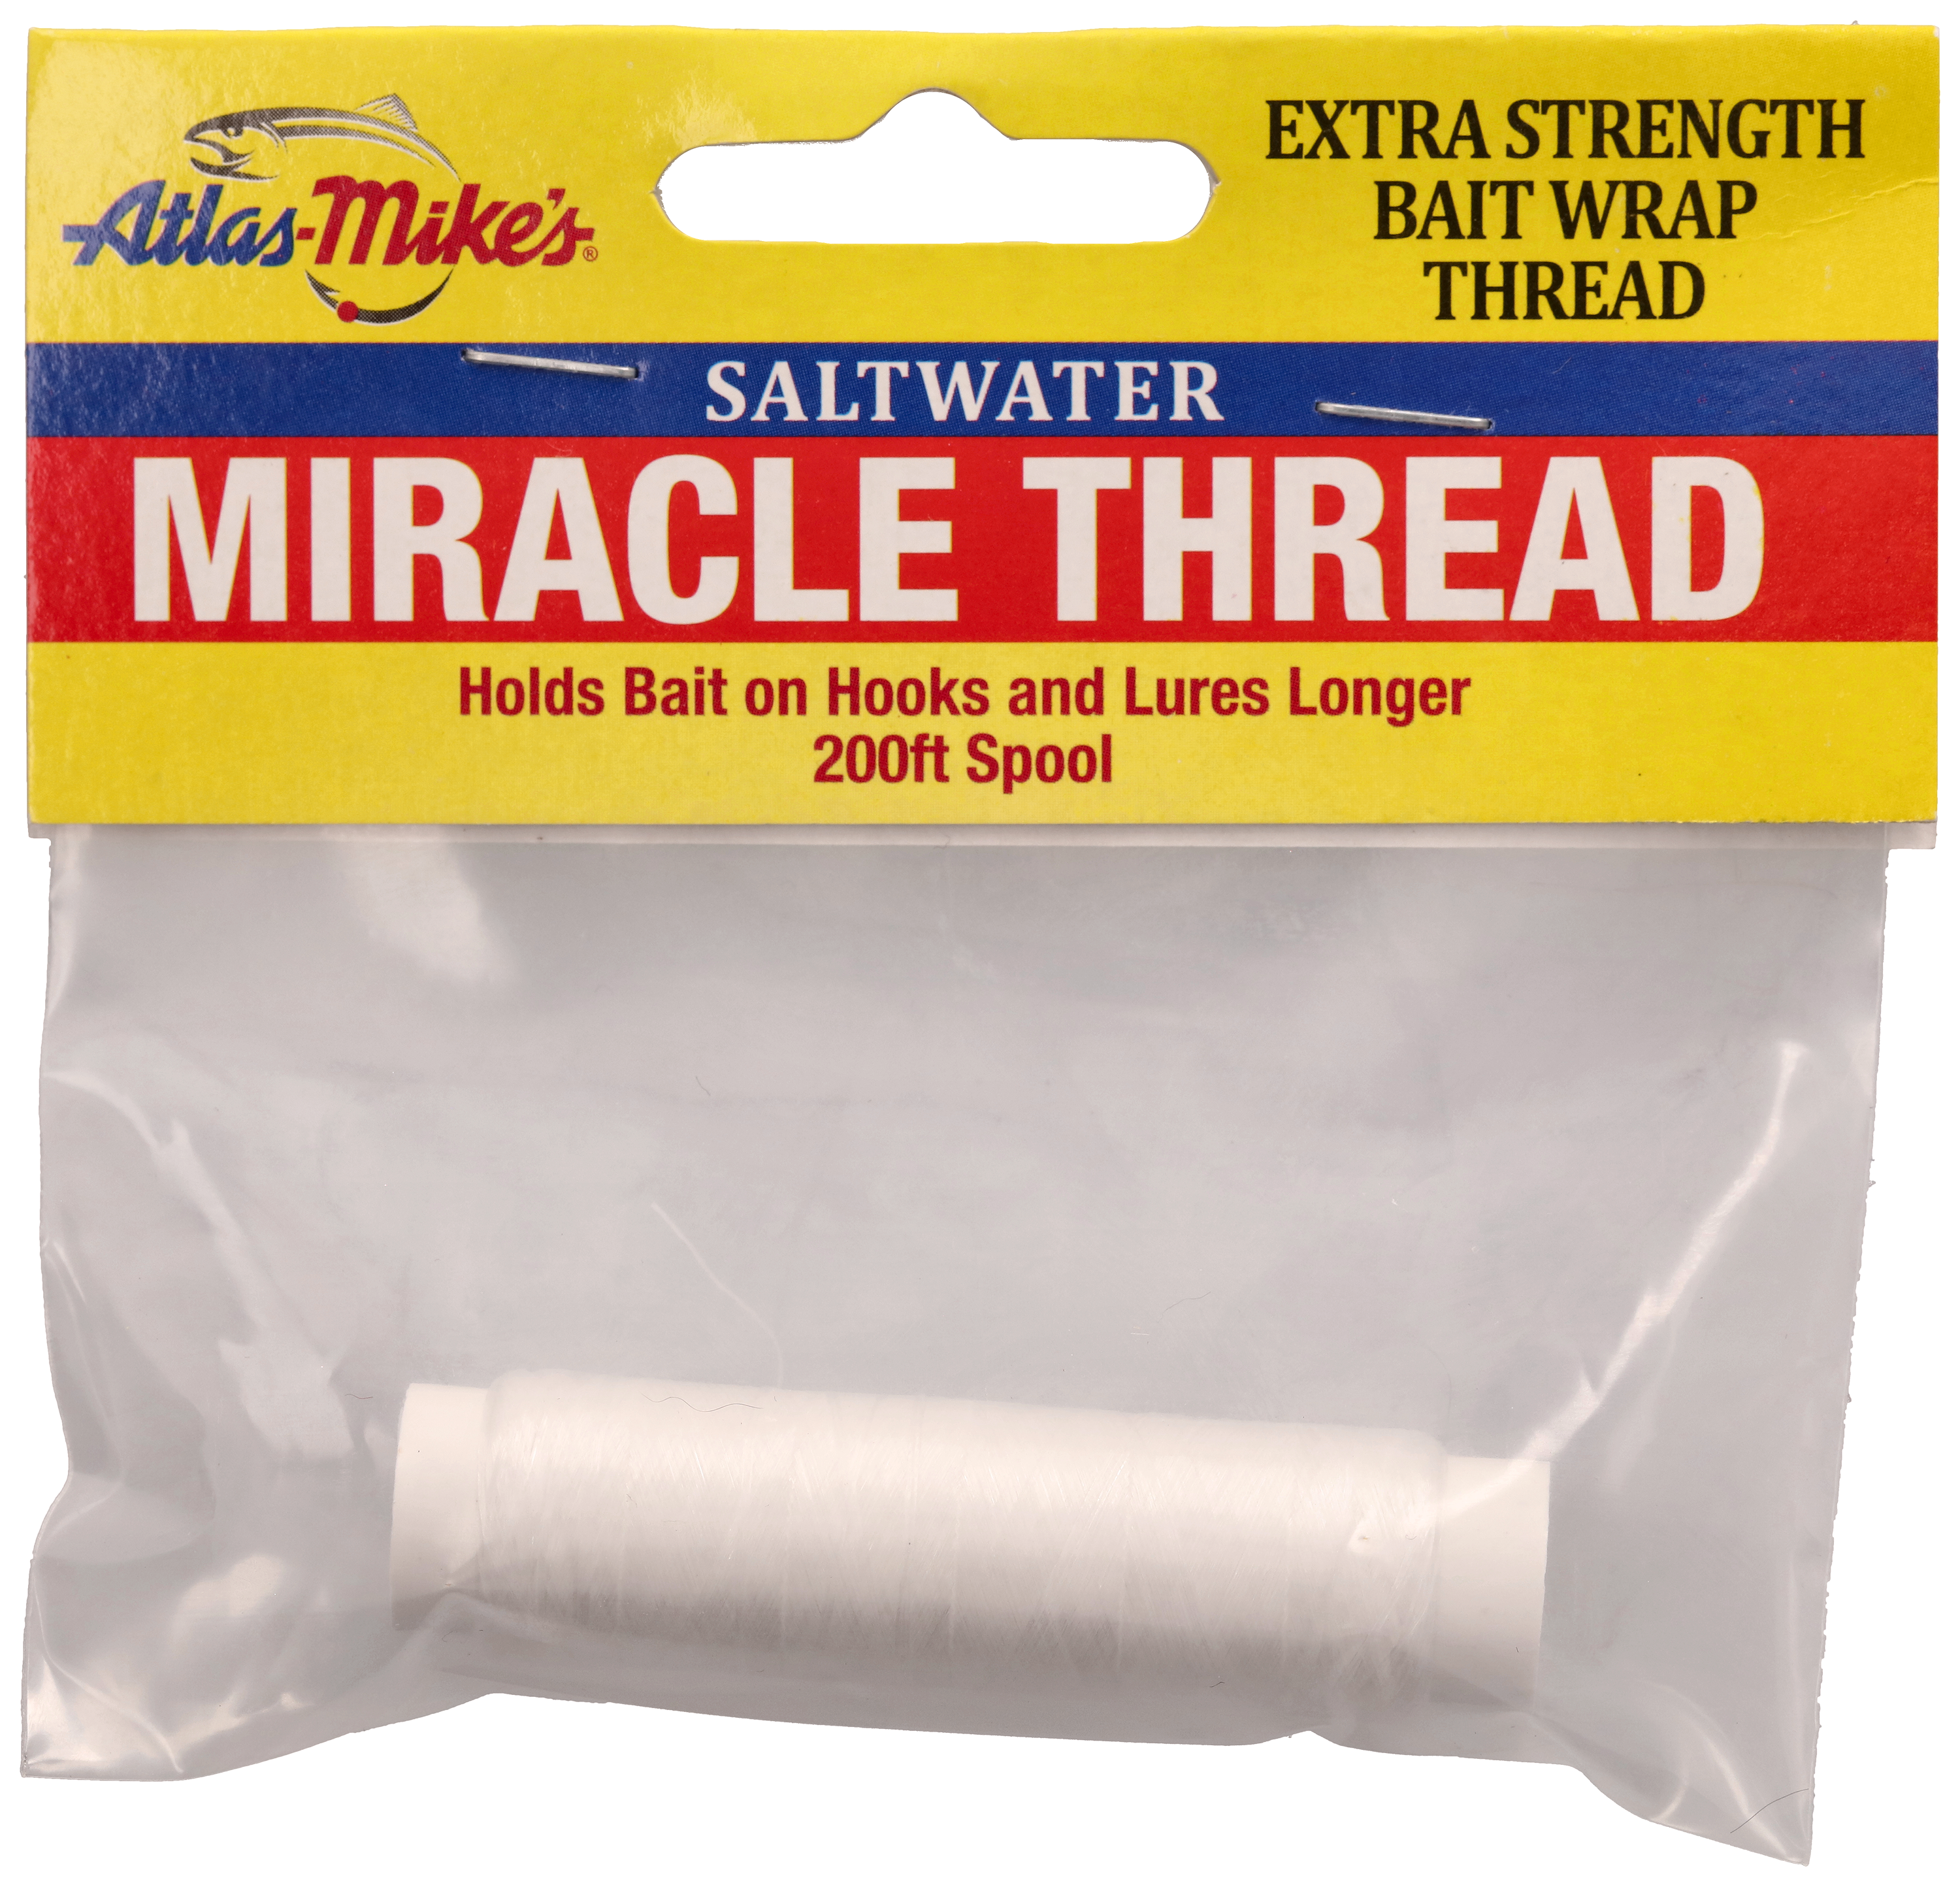 Atlas-Mike's 66830 Miracle Thread ACCESSORIES